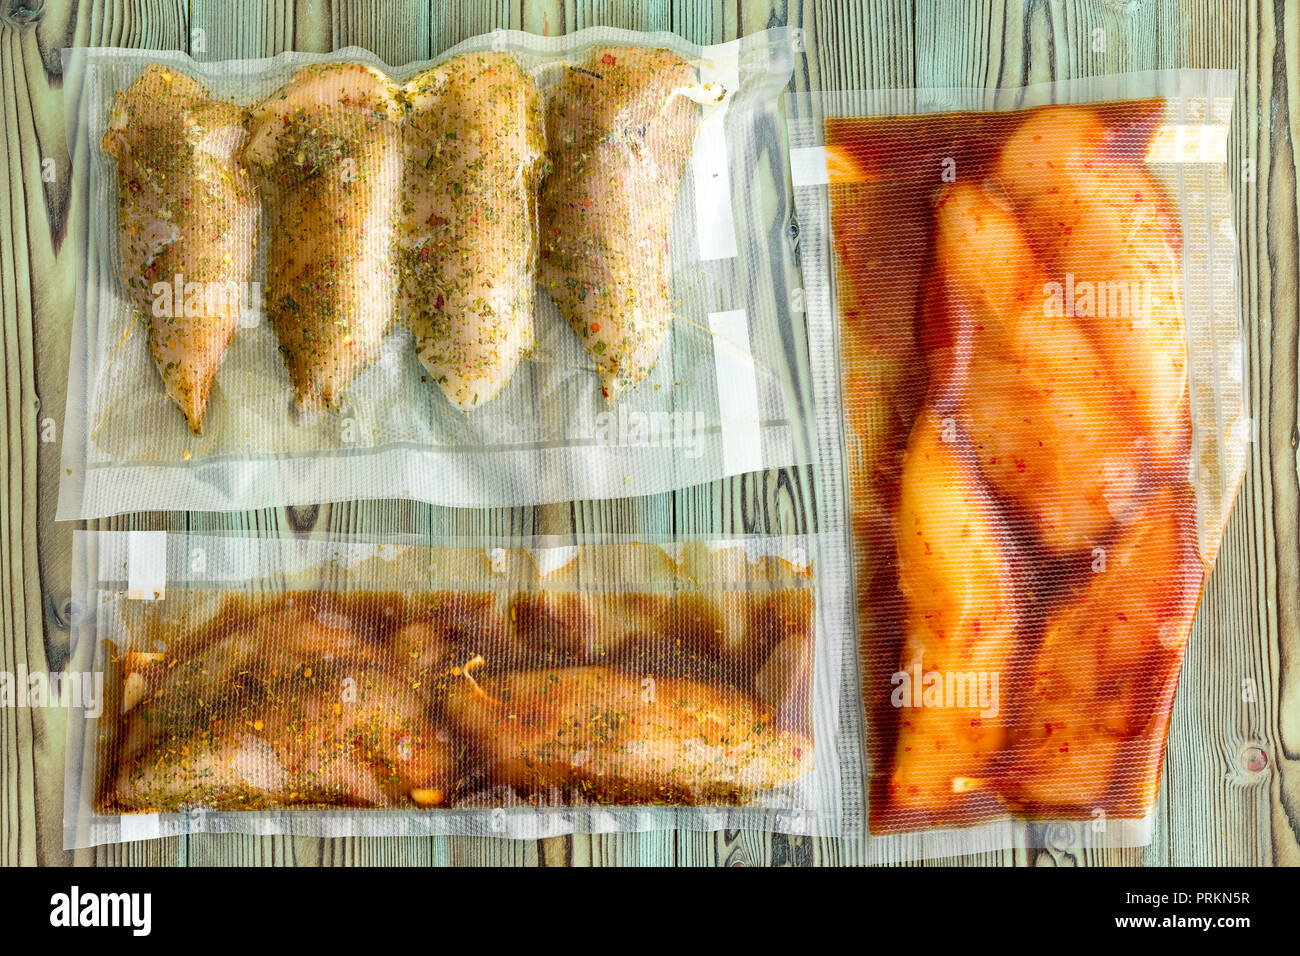 Vacuum packed portions of lean chicken breast with assorted marinades and seasoned with spices and herbs ready for freezing or sous-vide cooking on ru Stock Photo